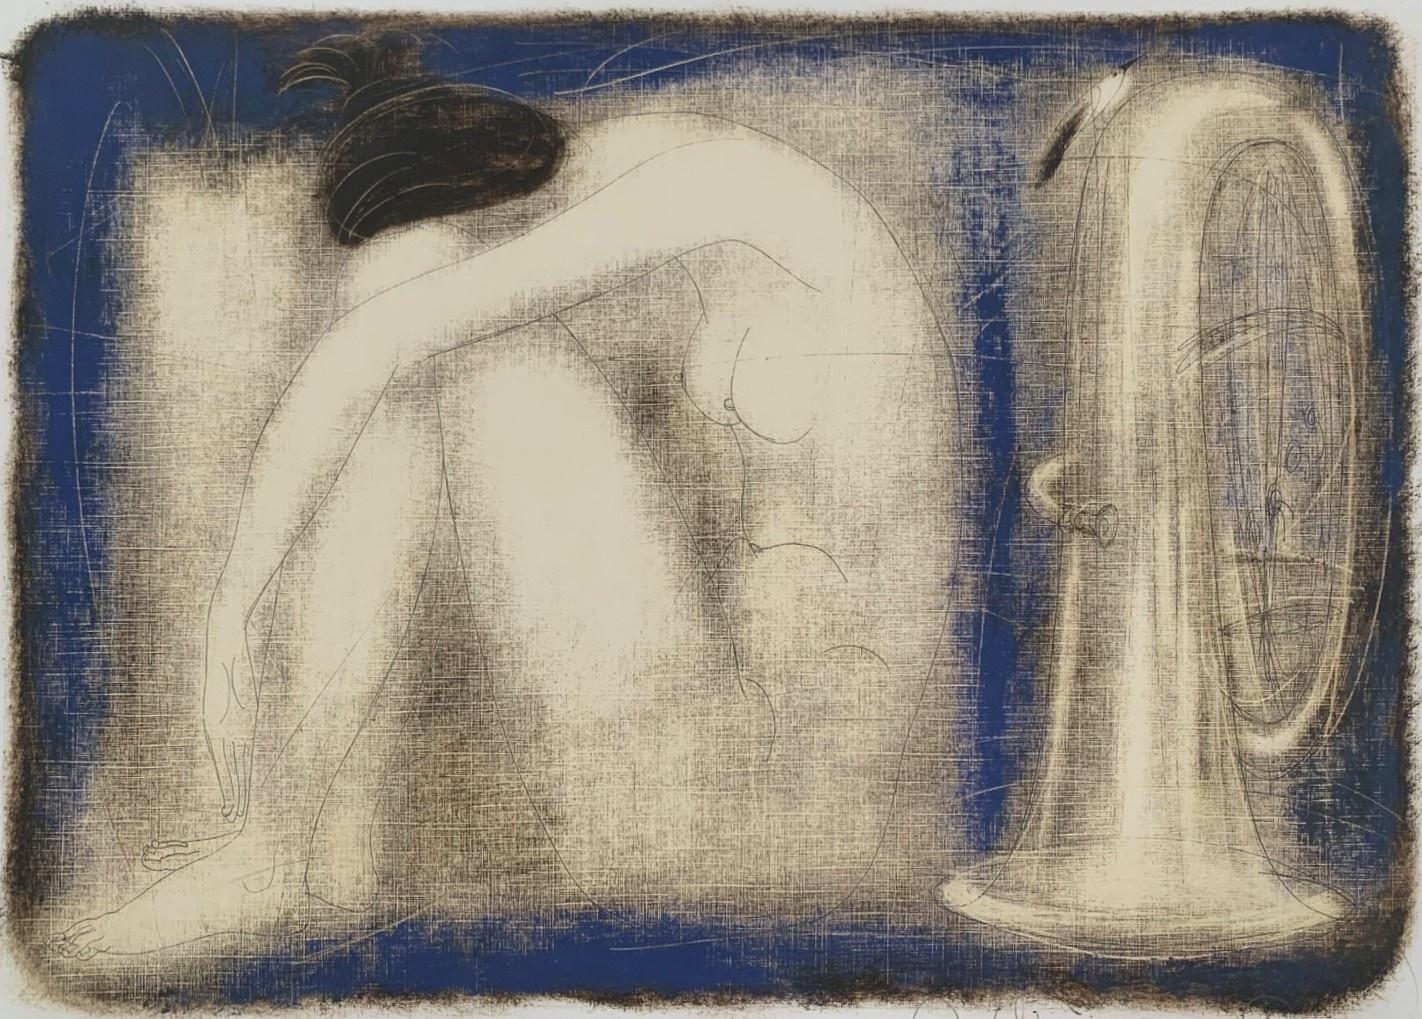 Siergiej Timochow Nude Print - Nude with tube. Contemporary Figurative Nude Monotype Print, European artist